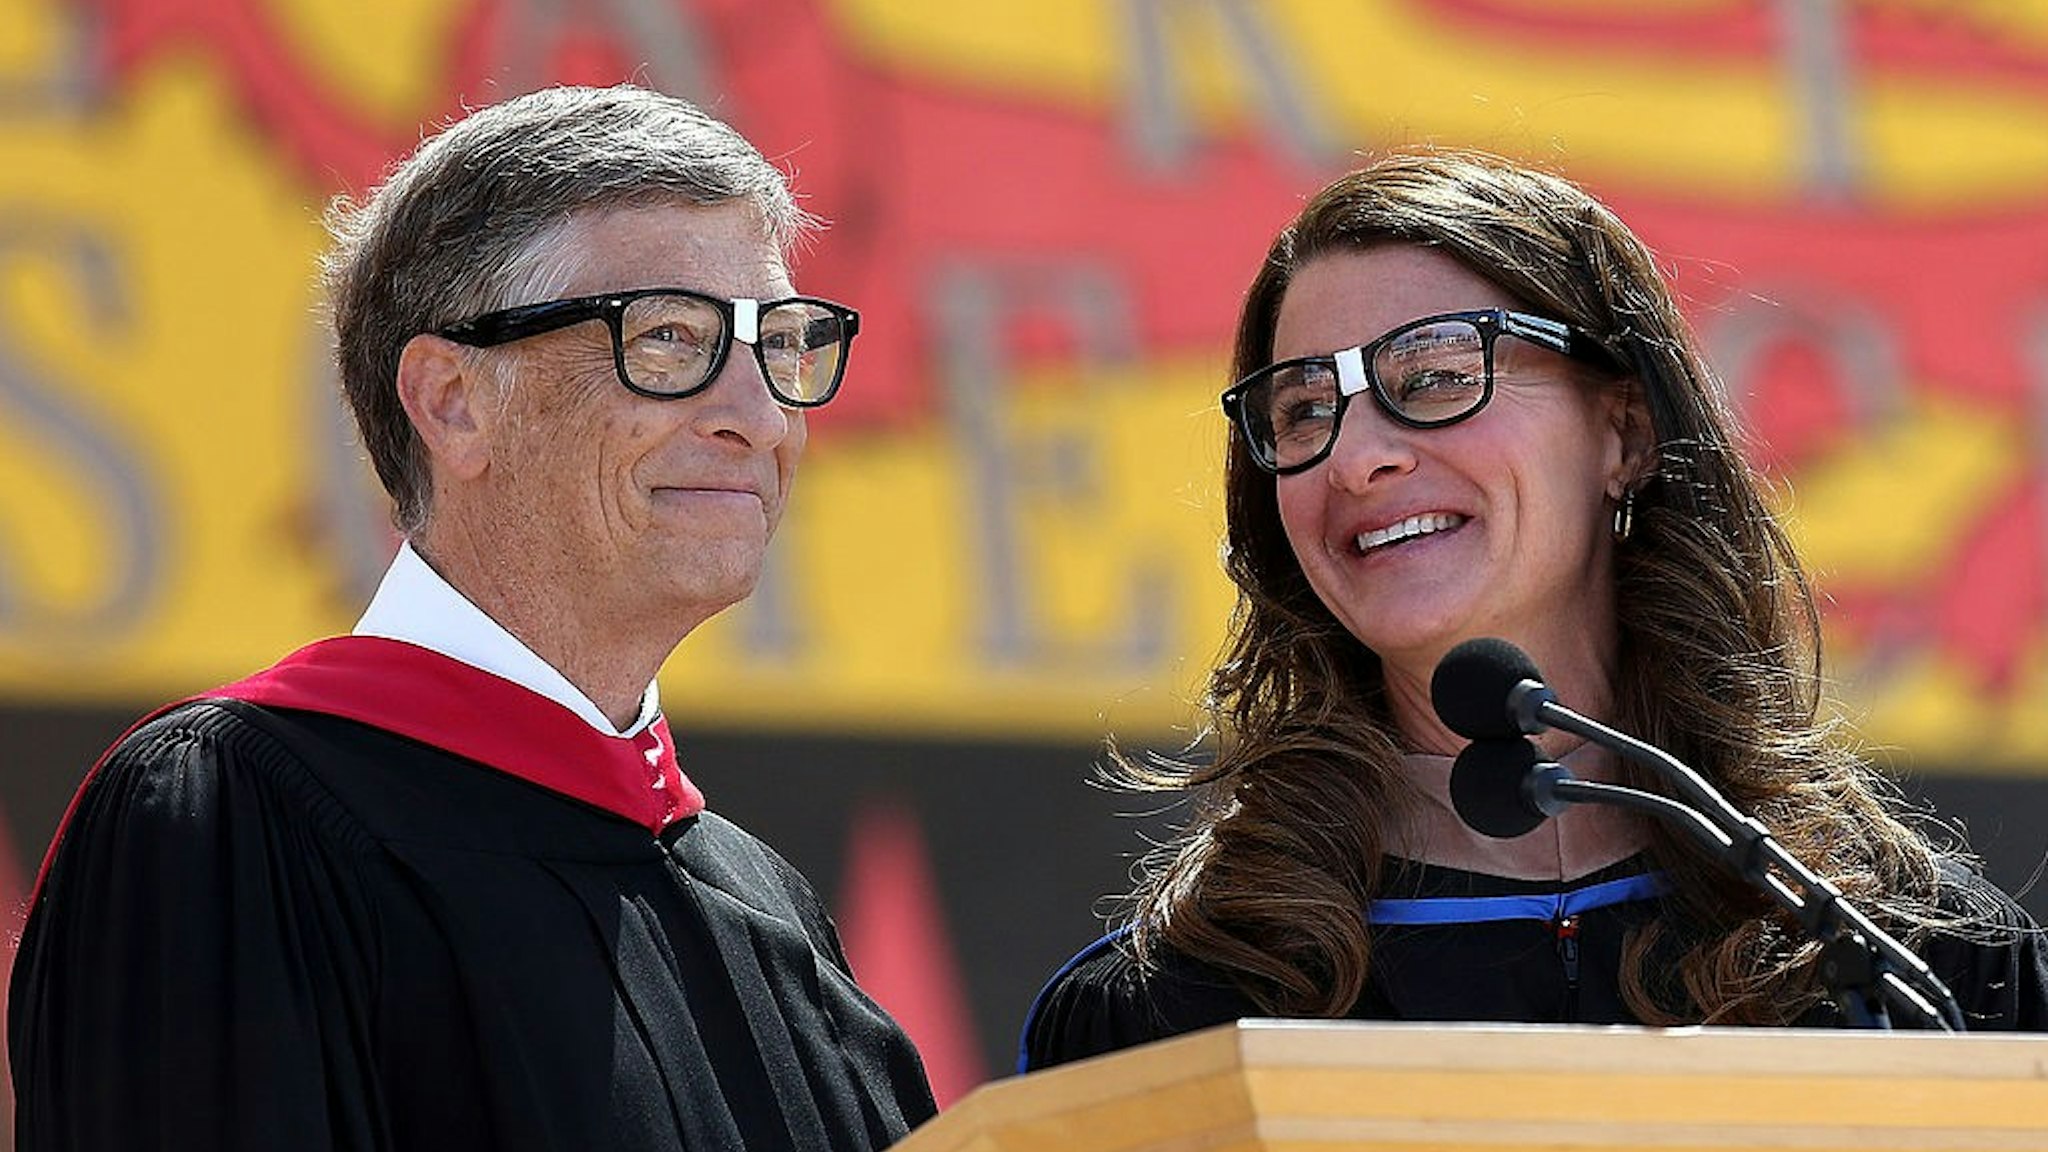 STANFORD, CA - JUNE 15: Microsoft founder and chairman Bill Gates shares the stage with his wife Melinda during the 123rd Stanford commencement ceremony June 15, 2014 in Stanford, California. Bill Gates and wife Melinda Gates delivered the commencement speech to Stanford University graduates. (Photo by